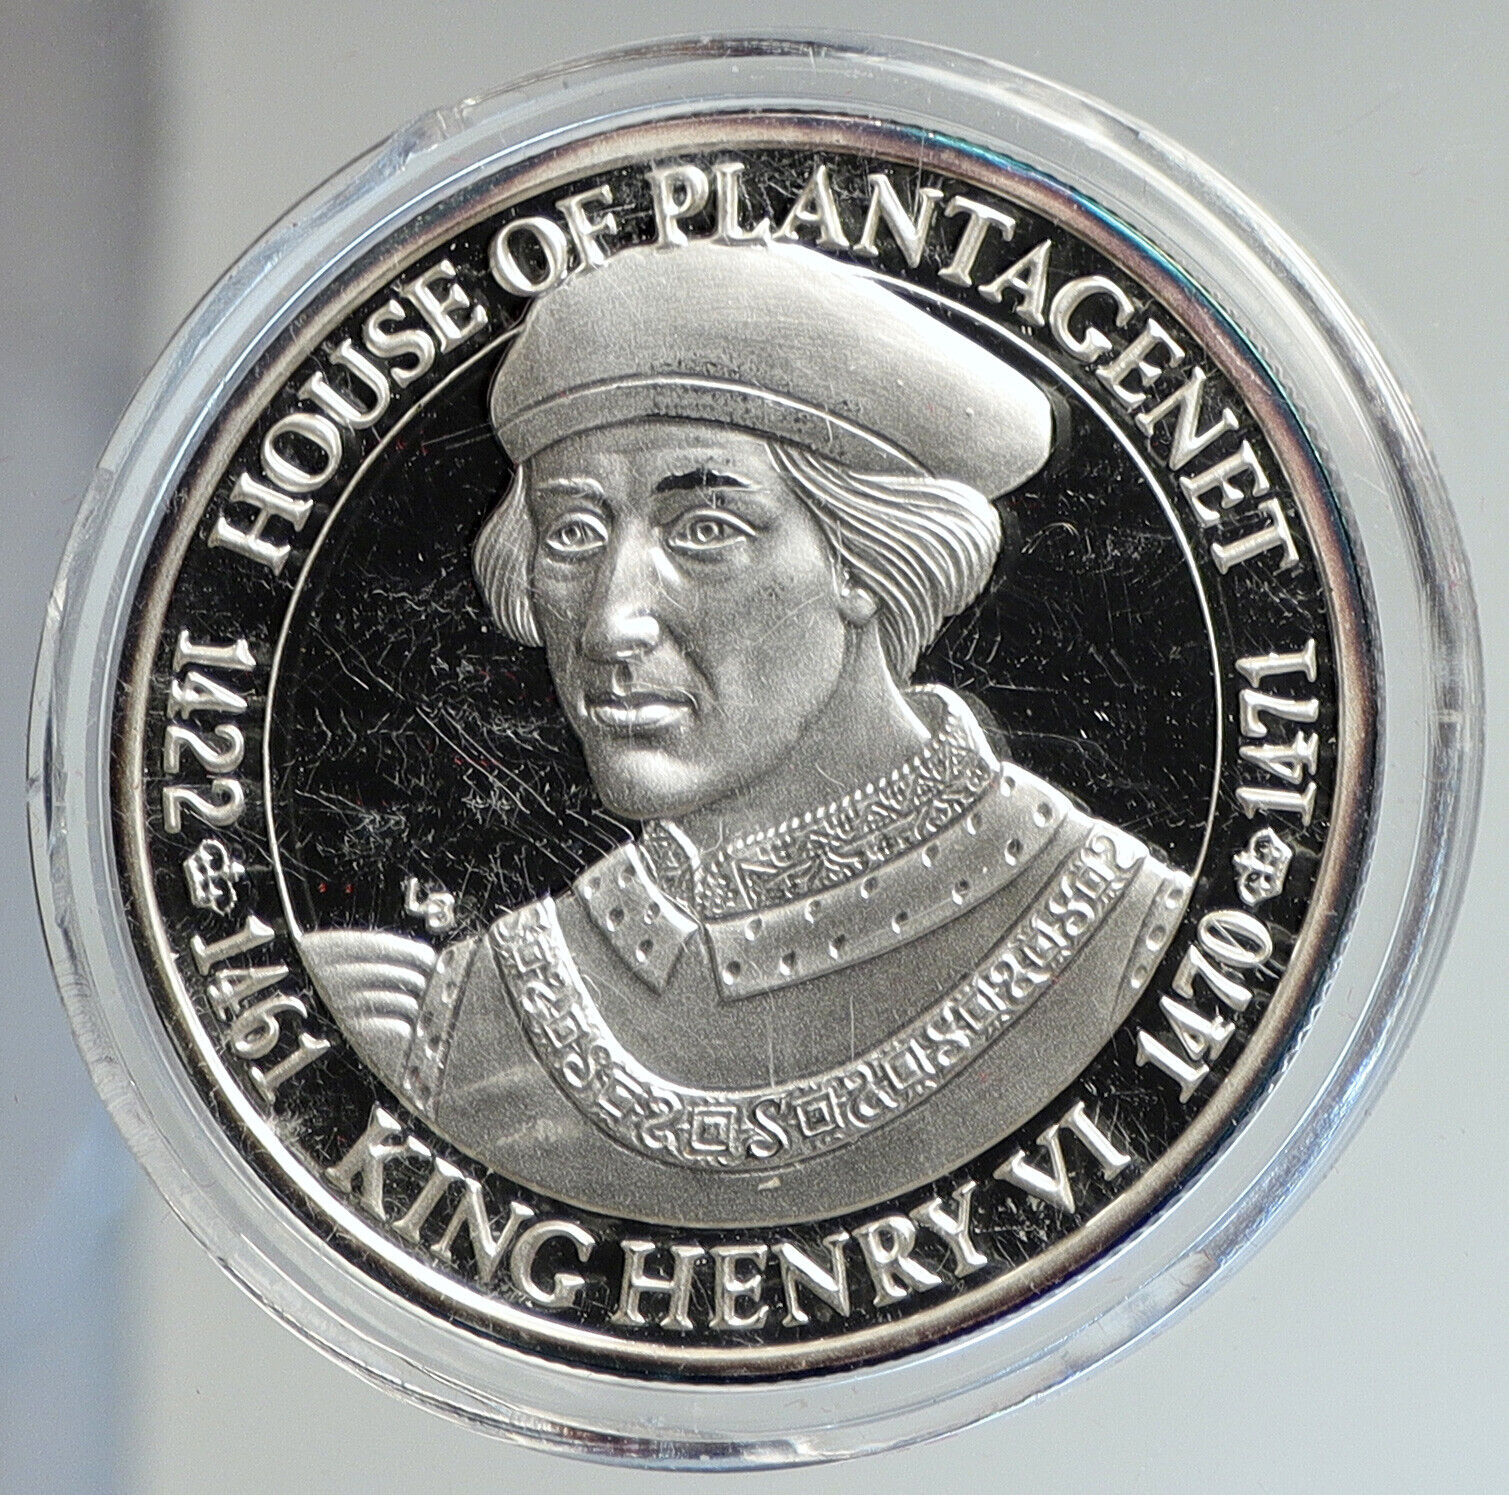 2002 TURKS & CAICOS KING HENRY VI Plantagenet Proof Silver 20 Crown Coin i112439